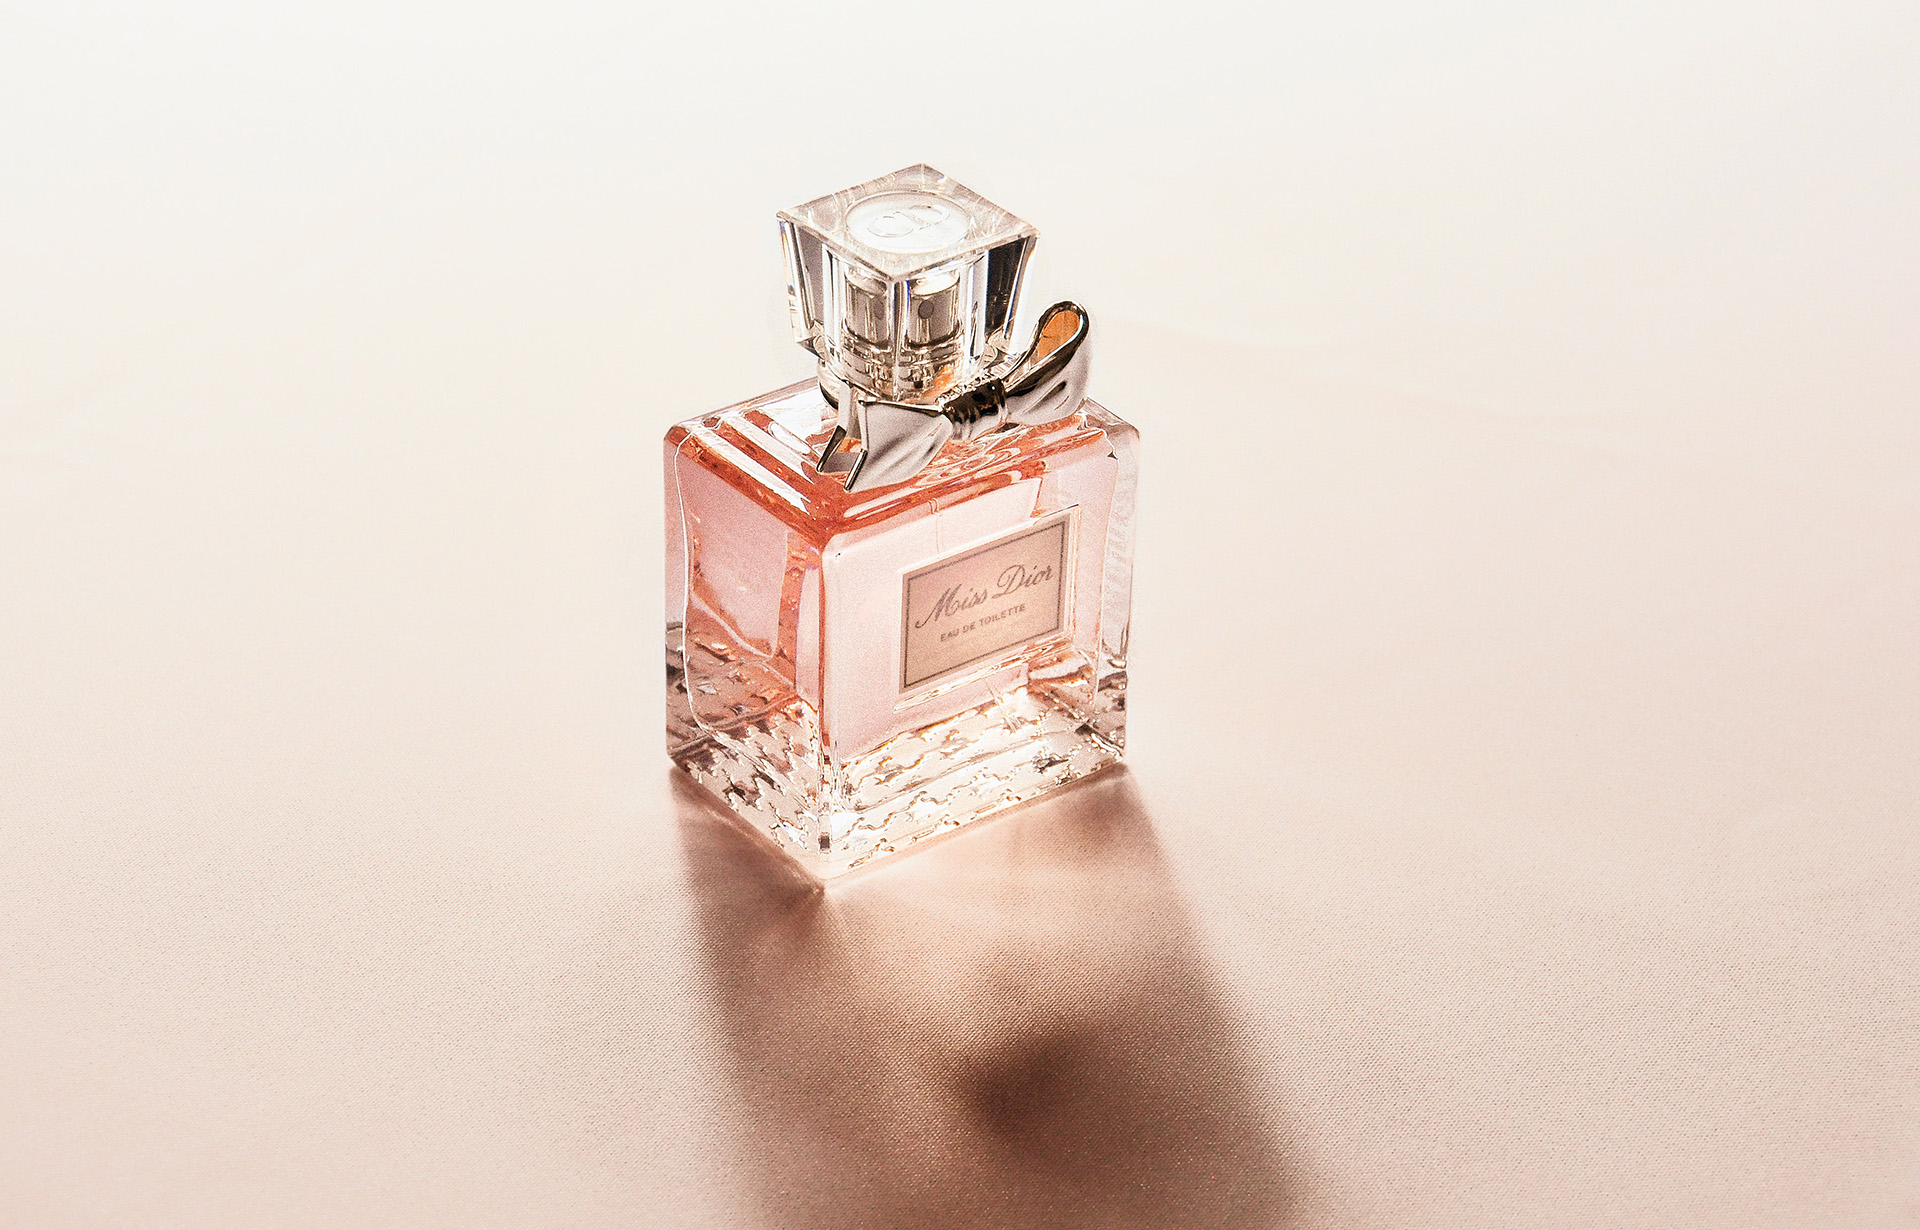 Pink Perfume Bottle - Header Image for the Rebrand Two Blog